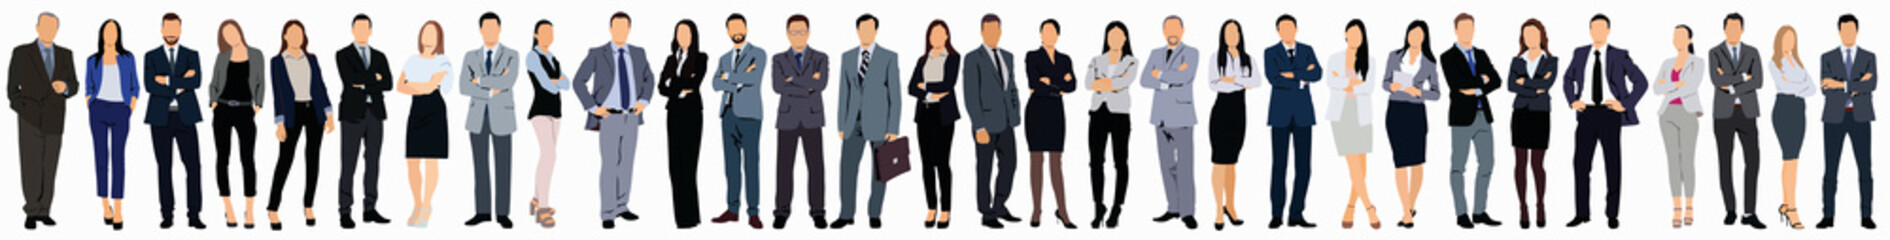 set of crowd of business people standing in a row